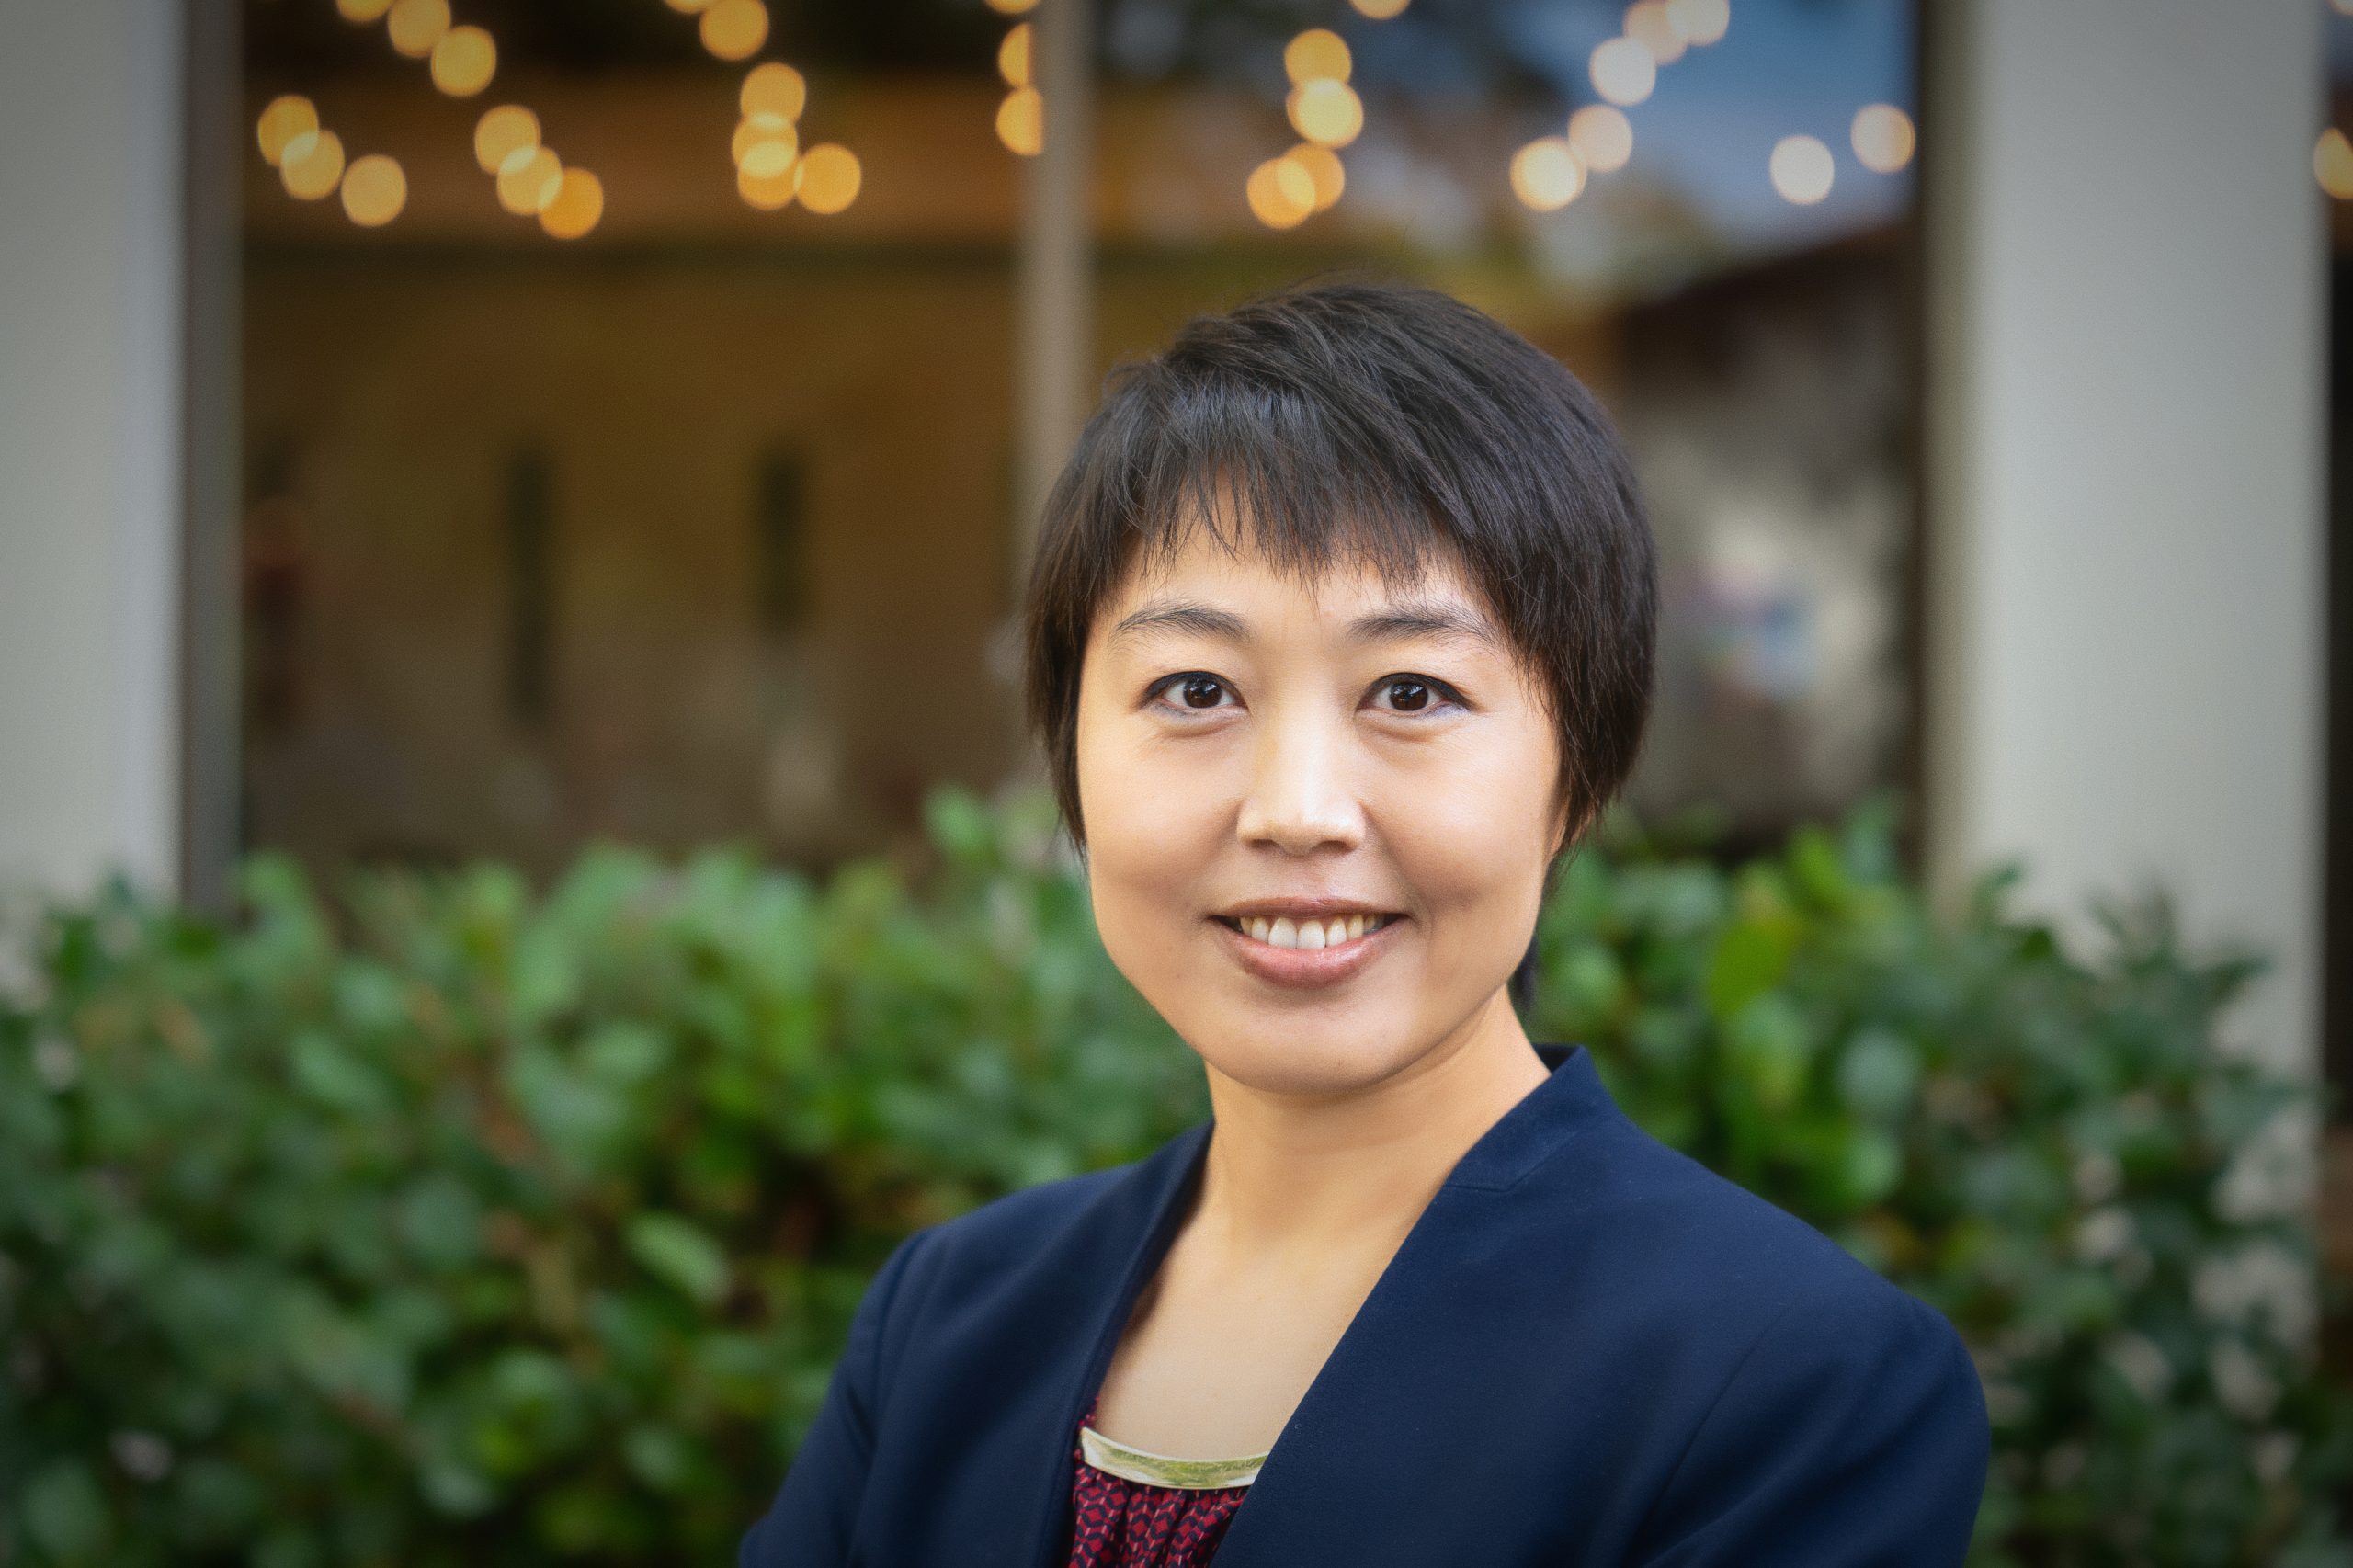 Dr. Lin Liu receives NIH Grant to Study Suicide among At-Risk Youth